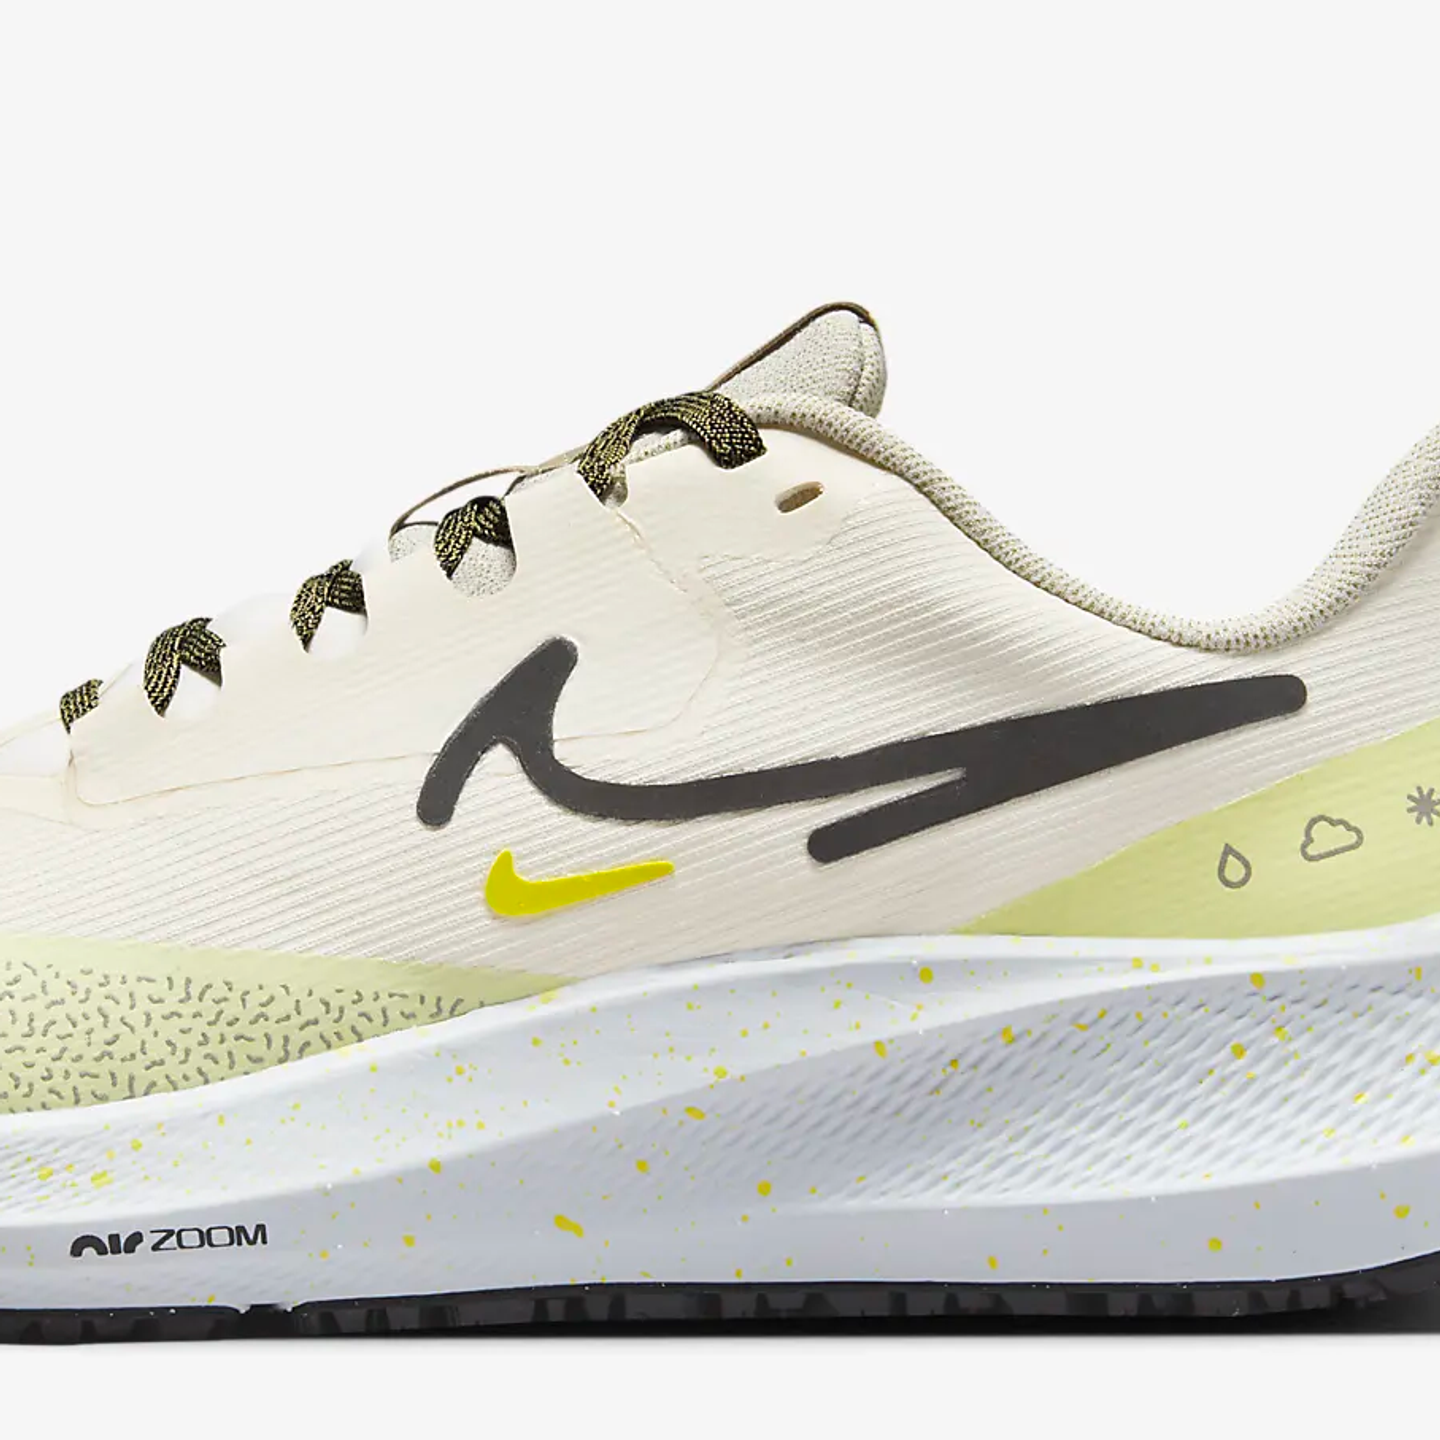 a pair of white and yellow nike running shoes​​​​‌﻿‍﻿​‍​‍‌‍﻿﻿‌﻿​‍‌‍‍‌‌‍‌﻿‌‍‍‌‌‍﻿‍​‍​‍​﻿‍‍​‍​‍‌﻿​﻿‌‍​‌‌‍﻿‍‌‍‍‌‌﻿‌​‌﻿‍‌​‍﻿‍‌‍‍‌‌‍﻿﻿​‍​‍​‍﻿​​‍​‍‌‍‍​‌﻿​‍‌‍‌‌‌‍‌‍​‍​‍​﻿‍‍​‍​‍‌‍‍​‌﻿‌​‌﻿‌​‌﻿​​‌﻿​﻿​﻿‍‍​‍﻿﻿​‍﻿﻿‌﻿‌‍‌‍‍‌‌﻿​﻿‌﻿‌‌‌‍​‌‌‍﻿​​‍﻿‌‌‍‌‌‌‍‌​‌‍‍‌‌﻿‌​‌‍‍‌‌‍﻿‍‌‍‌﻿​‍﻿‌‌﻿​﻿‌﻿‌​‌﻿‌‌‌‍‌​‌‍‍‌‌‍﻿﻿​‍﻿‍‌﻿​﻿‌‍​‌‌‍﻿‍‌‍‍‌‌﻿‌​‌﻿‍‌​‍﻿‍‌‍​‍‌﻿‌‌‌‍‍‌‌‍﻿​‌‍‌​​‍﻿﻿‌﻿​‍‌‍‌‌‌‍﻿‌‌‍‍‌‌﻿‍​​‍﻿﻿‌‍‍‌‌‍﻿‍‌﻿‌​‌‍‌‌‌‍﻿‍‌﻿‌​​‍﻿﻿‌‍‌‌‌‍‌​‌‍‍‌‌﻿‌​​‍﻿﻿‌‍﻿‌‌‍﻿﻿‌‍‌​‌‍‌‌​﻿﻿‌‌﻿​​‌﻿​‍‌‍‌‌‌﻿​﻿‌‍‌‌‌‍﻿‍‌﻿‌​‌‍​‌‌﻿‌​‌‍‍‌‌‍﻿﻿‌‍﻿‍​﻿‍﻿‌‍‍‌‌‍‌​​﻿﻿‌​﻿​​‌‍‌‌​﻿‌‍‌‍‌‍‌‍​‌​﻿​‍​﻿​﻿​﻿‌‌​‍﻿‌​﻿​﻿‌‍​‍‌‍‌​​﻿‌‌​‍﻿‌​﻿‌​​﻿​‌‌‍​﻿‌‍​﻿​‍﻿‌​﻿‍‌‌‍‌‍​﻿​‍​﻿‌‌​‍﻿‌​﻿‌‌​﻿​﻿‌‍‌​‌‍​﻿​﻿​​‌‍​‌​﻿‌‌‌‍‌‍‌‍‌‍​﻿‌﻿‌‍‌​​﻿​‍​﻿‍﻿‌﻿‌​‌﻿‍‌‌﻿​​‌‍‌‌​﻿﻿‌‌﻿​﻿‌‍‍​‌‍﻿﻿‌‍‌‌​﻿‍﻿‌﻿​​‌‍​‌‌﻿‌​‌‍‍​​﻿﻿‌‌‍﻿‌‌‍‌‌‌‍‌​‌‍‍‌‌‍​‌​‍‌‌​﻿‌‌‌​​‍‌‌﻿﻿‌‍‍﻿‌‍‌‌‌﻿‍‌​‍‌‌​﻿​﻿‌​‌​​‍‌‌​﻿​﻿‌​‌​​‍‌‌​﻿​‍​﻿​‍​﻿‍​​﻿​‌‌‍​‌‌‍‌​‌‍‌‌‌‍‌‌​﻿​‌​﻿‌‌‌‍‌‍​﻿‌﻿​﻿‌​‌‍‌‍​‍‌‌​﻿​‍​﻿​‍​‍‌‌​﻿‌‌‌​‌​​‍﻿‍‌‍​‌‌‍﻿​‌﻿‌​​﻿‍﻿‌﻿‌​‌‍﻿﻿‌‍﻿﻿‌‍﻿​​﻿﻿‌‌﻿​​‌﻿​‍‌‍‌‌‌﻿​﻿‌‍‌‌‌‍﻿‍‌﻿‌​‌‍​‌‌﻿‌​‌‍‍‌‌‍﻿﻿‌‍﻿‍​﻿﻿﻿‌‍​‍‌‍​‌‌﻿​﻿‌‍‌‌‌‌‌‌‌﻿​‍‌‍﻿​​﻿﻿‌‌‍‍​‌﻿‌​‌﻿‌​‌﻿​​‌﻿​﻿​‍‌‌​﻿​﻿‌​​‌​‍‌‌​﻿​‍‌​‌‍​‍‌‌​﻿​‍‌​‌‍‌﻿‌‍‌‍‍‌‌﻿​﻿‌﻿‌‌‌‍​‌‌‍﻿​​‍﻿‌‌‍‌‌‌‍‌​‌‍‍‌‌﻿‌​‌‍‍‌‌‍﻿‍‌‍‌﻿​‍﻿‌‌﻿​﻿‌﻿‌​‌﻿‌‌‌‍‌​‌‍‍‌‌‍﻿﻿​‍﻿‍‌﻿​﻿‌‍​‌‌‍﻿‍‌‍‍‌‌﻿‌​‌﻿‍‌​‍﻿‍‌‍​‍‌﻿‌‌‌‍‍‌‌‍﻿​‌‍‌​​‍‌‍‌‍‍‌‌‍‌​​﻿﻿‌​﻿​​‌‍‌‌​﻿‌‍‌‍‌‍‌‍​‌​﻿​‍​﻿​﻿​﻿‌‌​‍﻿‌​﻿​﻿‌‍​‍‌‍‌​​﻿‌‌​‍﻿‌​﻿‌​​﻿​‌‌‍​﻿‌‍​﻿​‍﻿‌​﻿‍‌‌‍‌‍​﻿​‍​﻿‌‌​‍﻿‌​﻿‌‌​﻿​﻿‌‍‌​‌‍​﻿​﻿​​‌‍​‌​﻿‌‌‌‍‌‍‌‍‌‍​﻿‌﻿‌‍‌​​﻿​‍​‍‌‍‌﻿‌​‌﻿‍‌‌﻿​​‌‍‌‌​﻿﻿‌‌﻿​﻿‌‍‍​‌‍﻿﻿‌‍‌‌​‍‌‍‌﻿​​‌‍​‌‌﻿‌​‌‍‍​​﻿﻿‌‌‍﻿‌‌‍‌‌‌‍‌​‌‍‍‌‌‍​‌​‍‌‌​﻿‌‌‌​​‍‌‌﻿﻿‌‍‍﻿‌‍‌‌‌﻿‍‌​‍‌‌​﻿​﻿‌​‌​​‍‌‌​﻿​﻿‌​‌​​‍‌‌​﻿​‍​﻿​‍​﻿‍​​﻿​‌‌‍​‌‌‍‌​‌‍‌‌‌‍‌‌​﻿​‌​﻿‌‌‌‍‌‍​﻿‌﻿​﻿‌​‌‍‌‍​‍‌‌​﻿​‍​﻿​‍​‍‌‌​﻿‌‌‌​‌​​‍﻿‍‌‍​‌‌‍﻿​‌﻿‌​​‍‌‍‌﻿‌﻿‌‍﻿﻿‌﻿​‍‌‍‍﻿‌﻿​﻿‌﻿​​‌‍​‌‌‍​﻿‌‍‌‌​﻿﻿‌‌﻿​‍‌‍‌‌‌‍﻿‌‌‍‍‌‌﻿‍​​‍‌‍‌﻿‌​‌‍﻿﻿‌‍﻿﻿‌‍﻿​​﻿﻿‌‌﻿​​‌﻿​‍‌‍‌‌‌﻿​﻿‌‍‌‌‌‍﻿‍‌﻿‌​‌‍​‌‌﻿‌​‌‍‍‌‌‍﻿﻿‌‍﻿‍​‍​‍‌﻿﻿‌